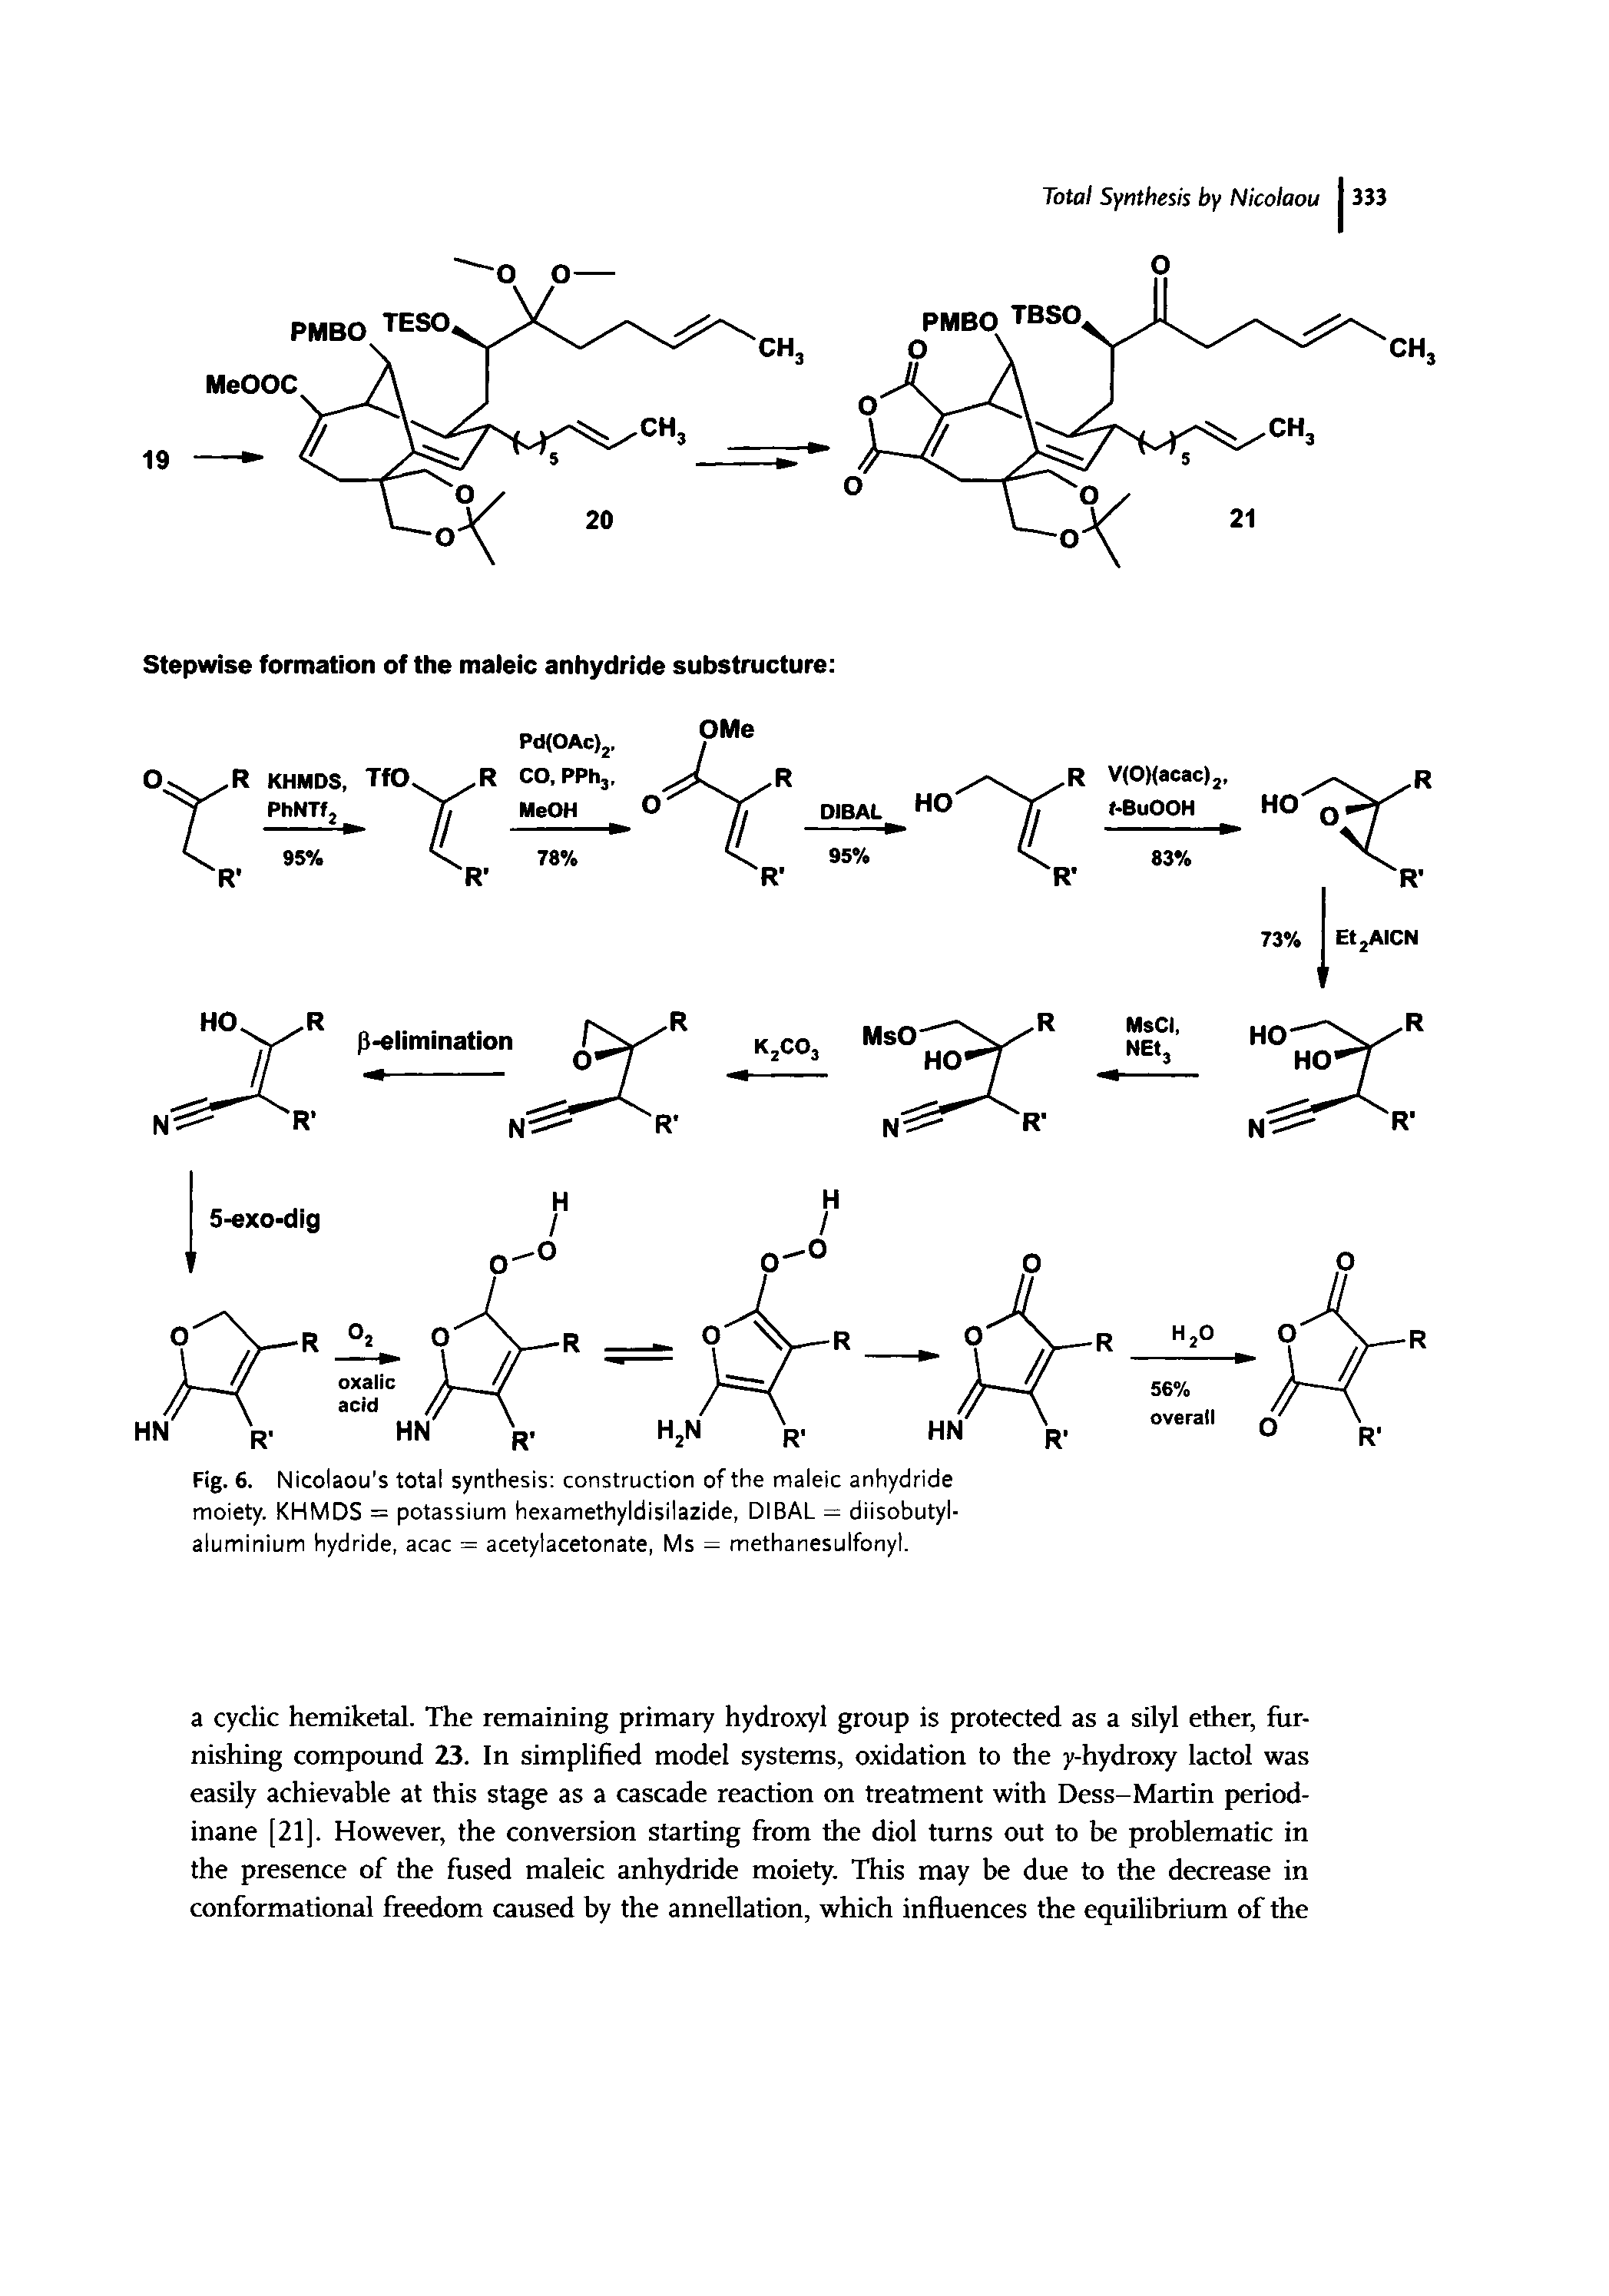 Fig. 6. Nicolaou s total synthesis construction of the maleic anhydride moiety. KHMDS = potassium hexamethyldisilazide, DIBAL = diisobutyl-aluminium hydride, acac = acetylacetonate, Ms = methanesulfonyl.